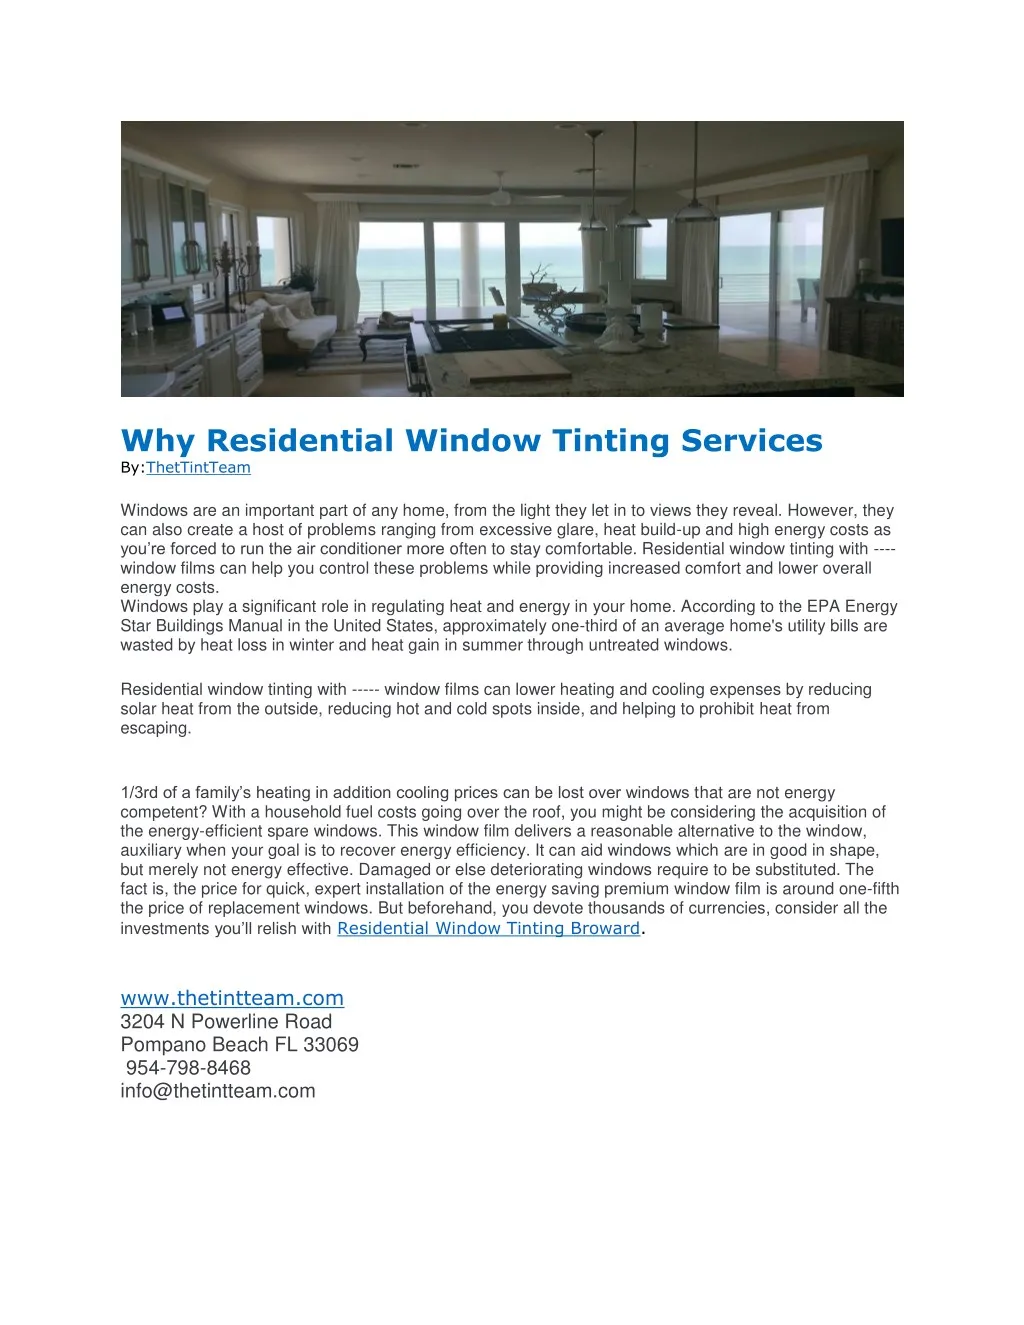 why residential window tinting services